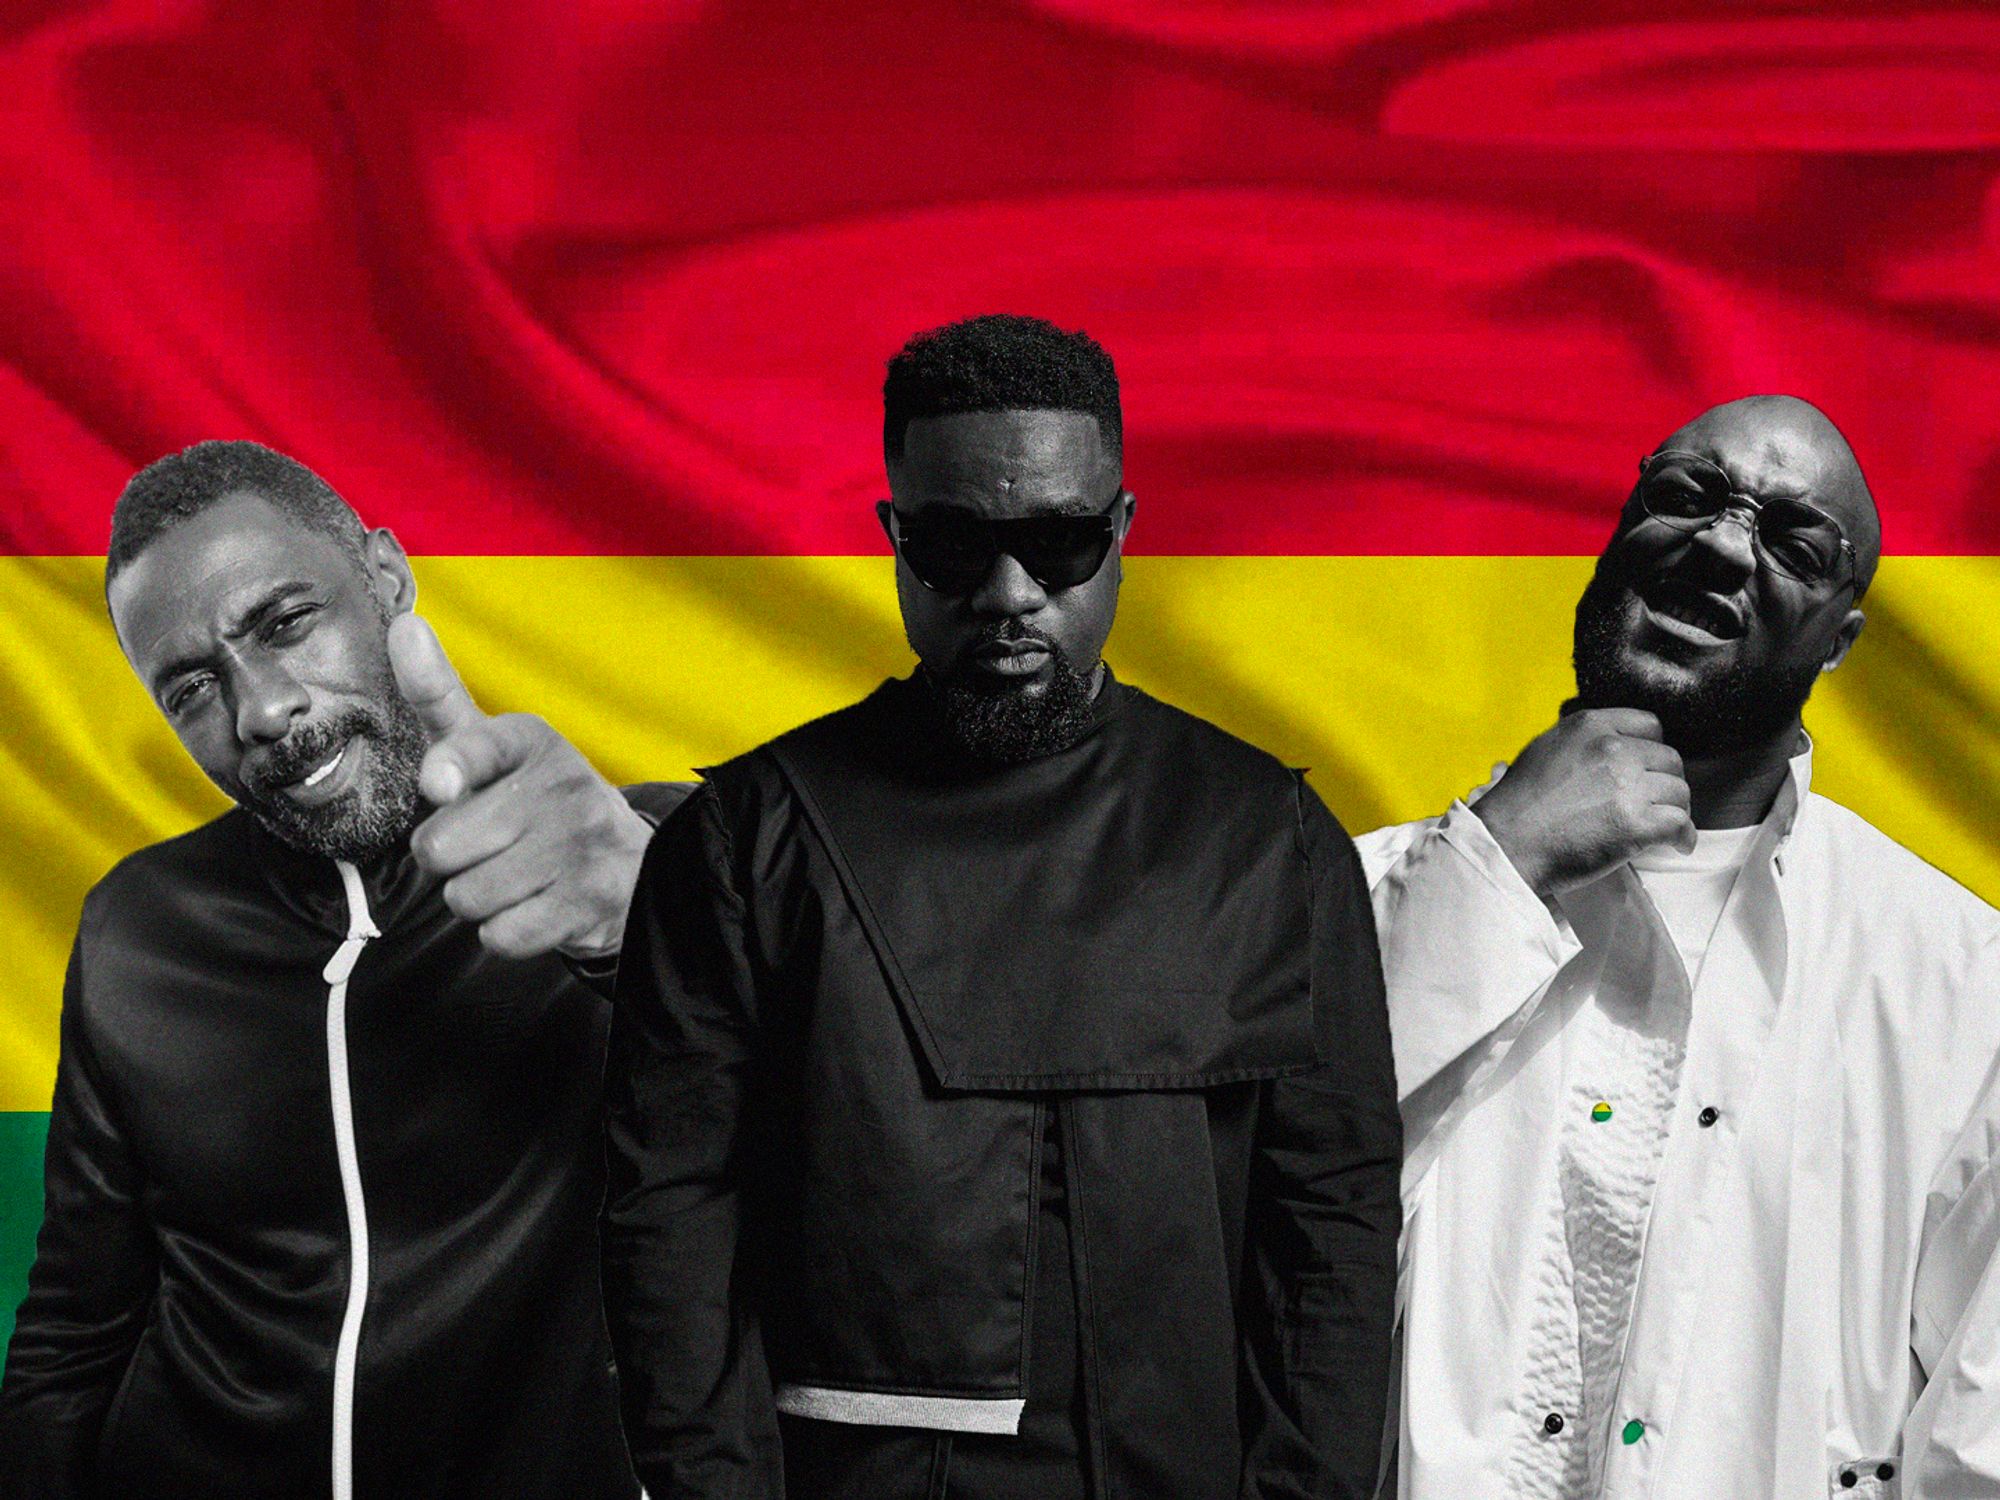 Sarkodie Enlists Idris Elba and Donae'o for New Feel-Good Anthem 'Party & Bullshit'